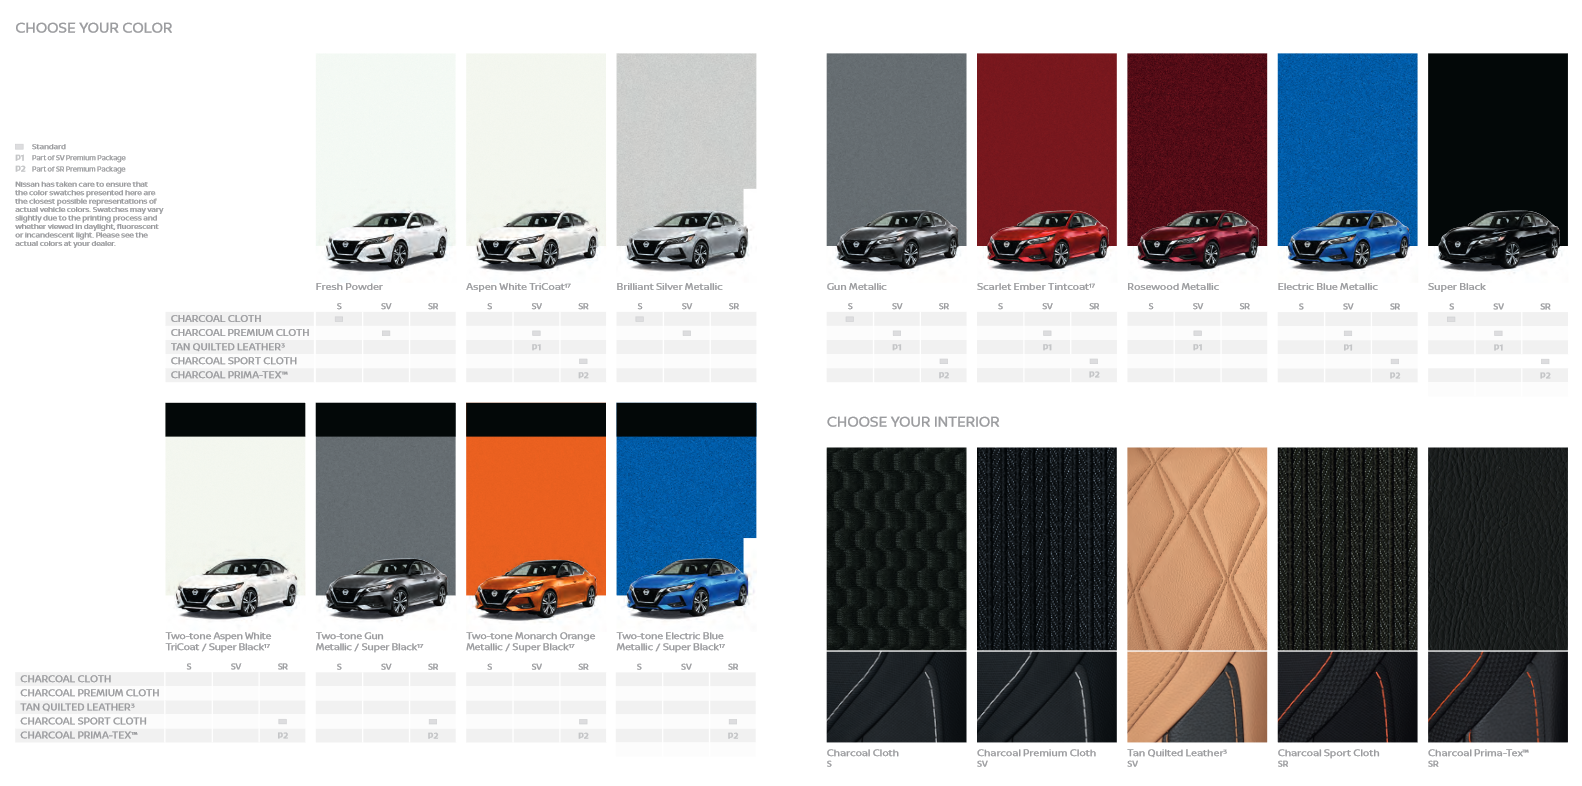 Exterior Colors Used on a 2021 Nissan Vehicle